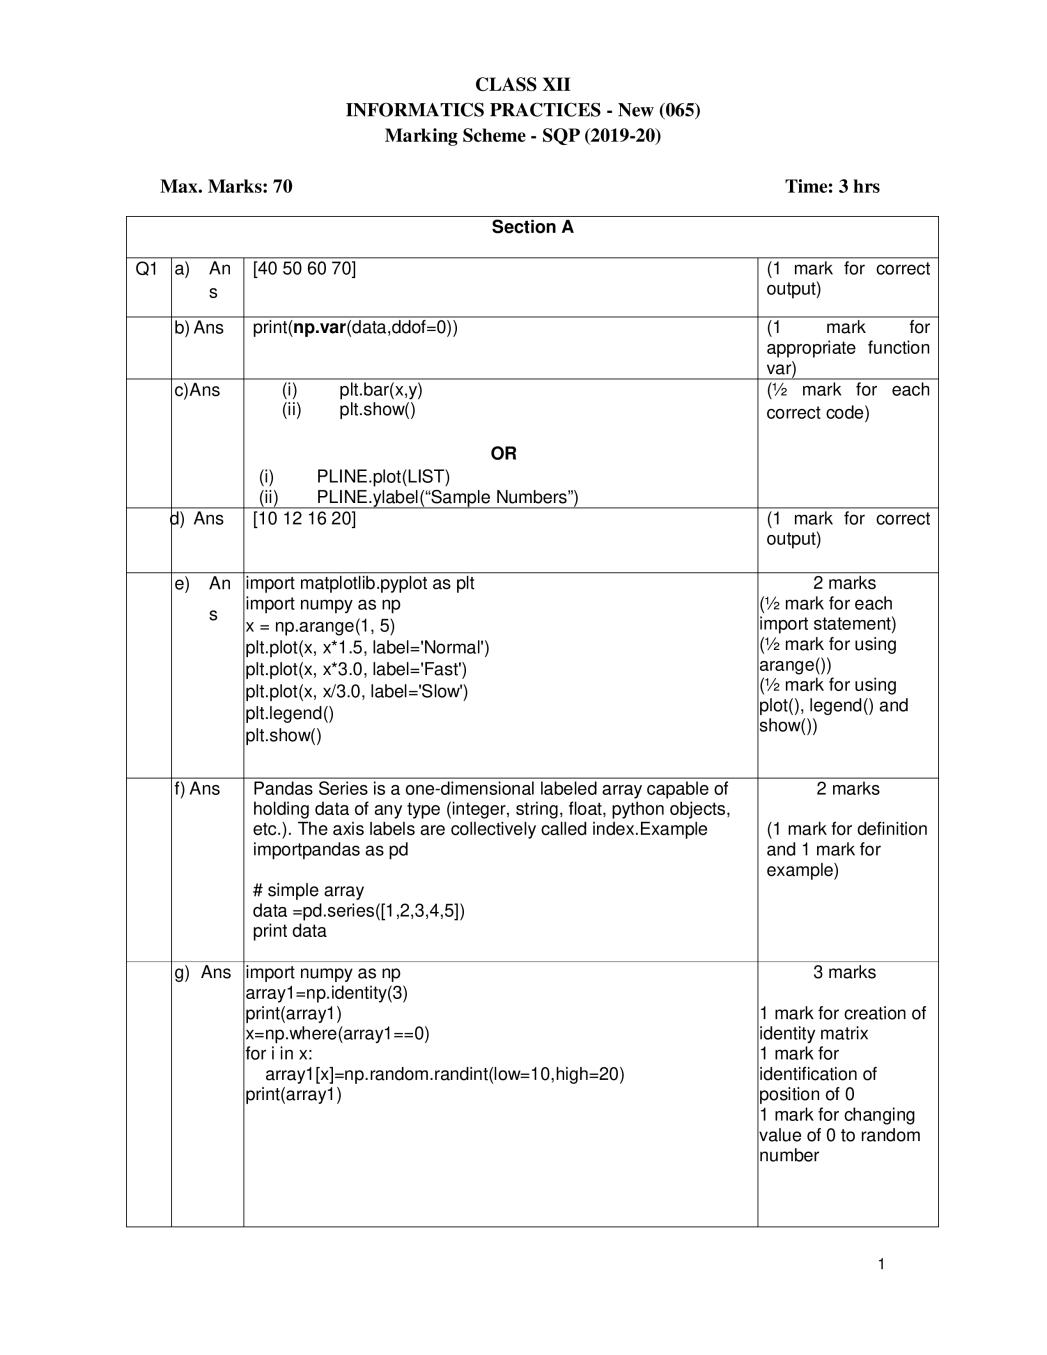 CBSE Class 12 Marking Scheme 2020 for Informatics Practices New - Page 1